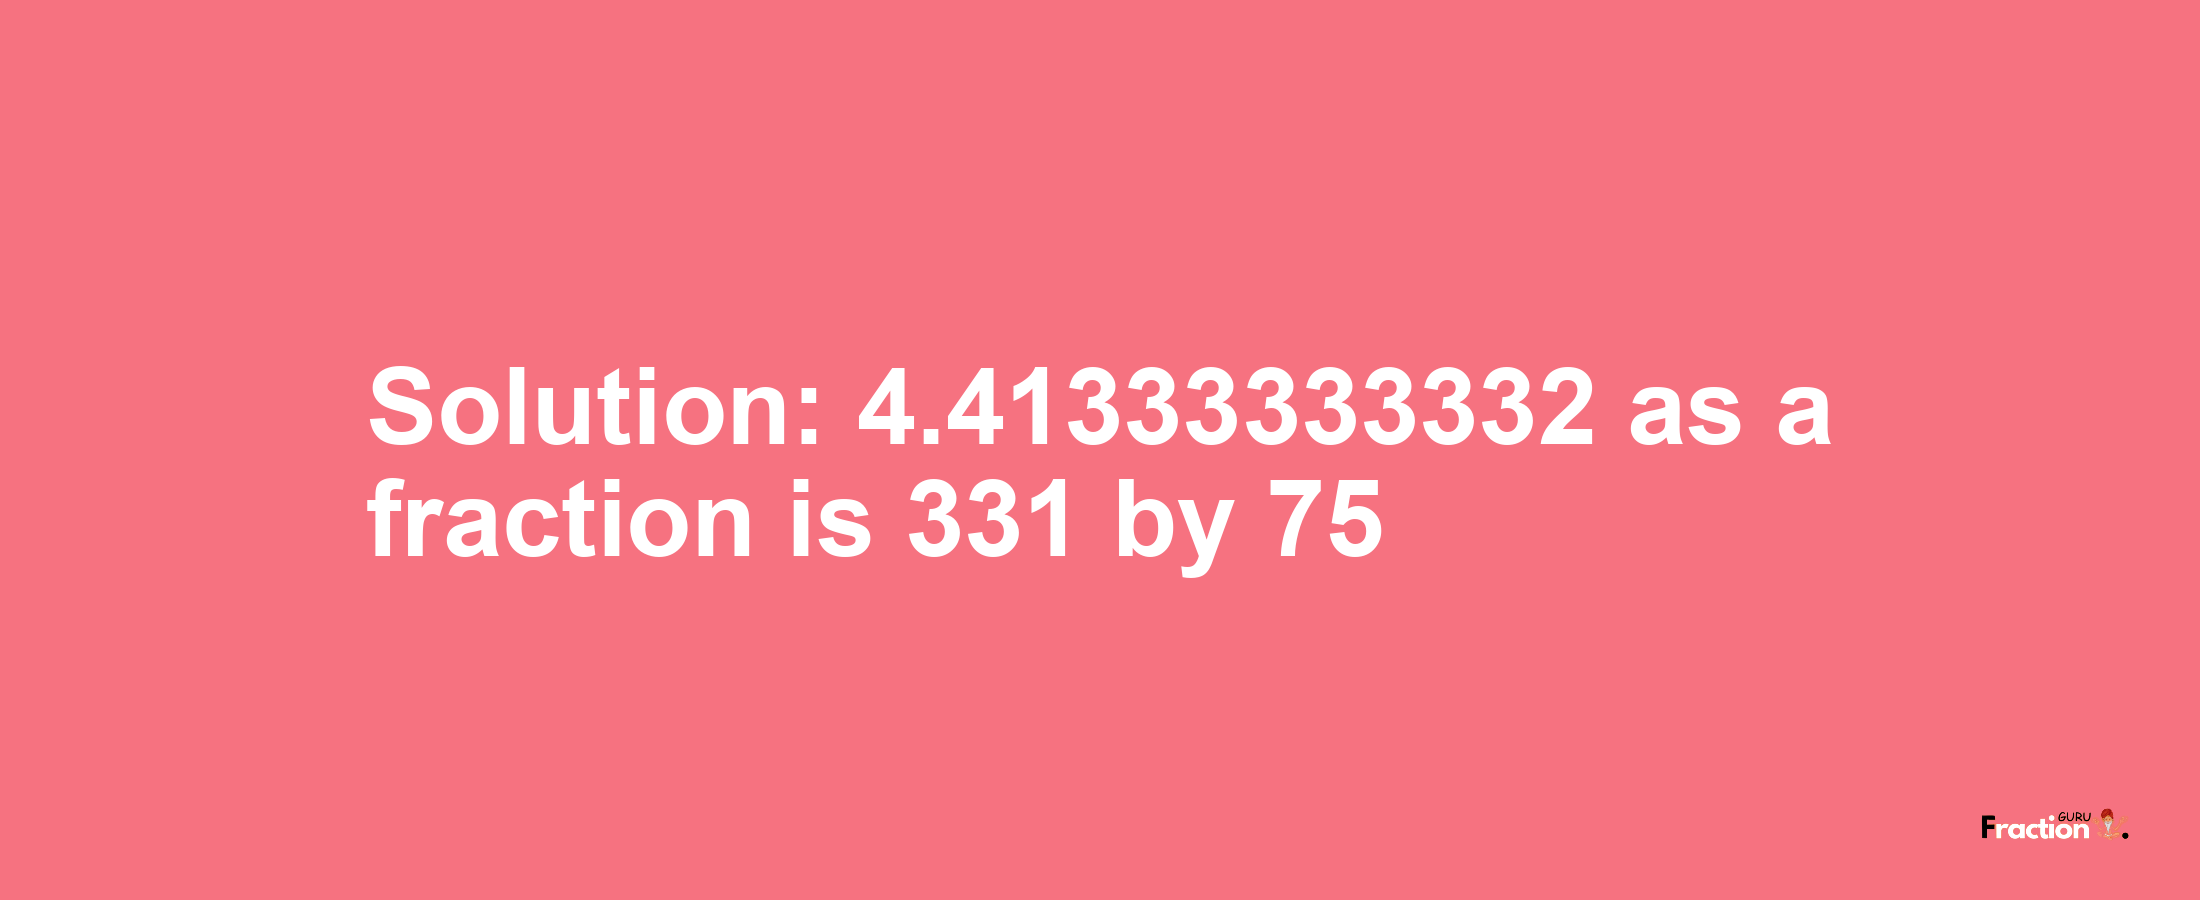 Solution:4.41333333332 as a fraction is 331/75